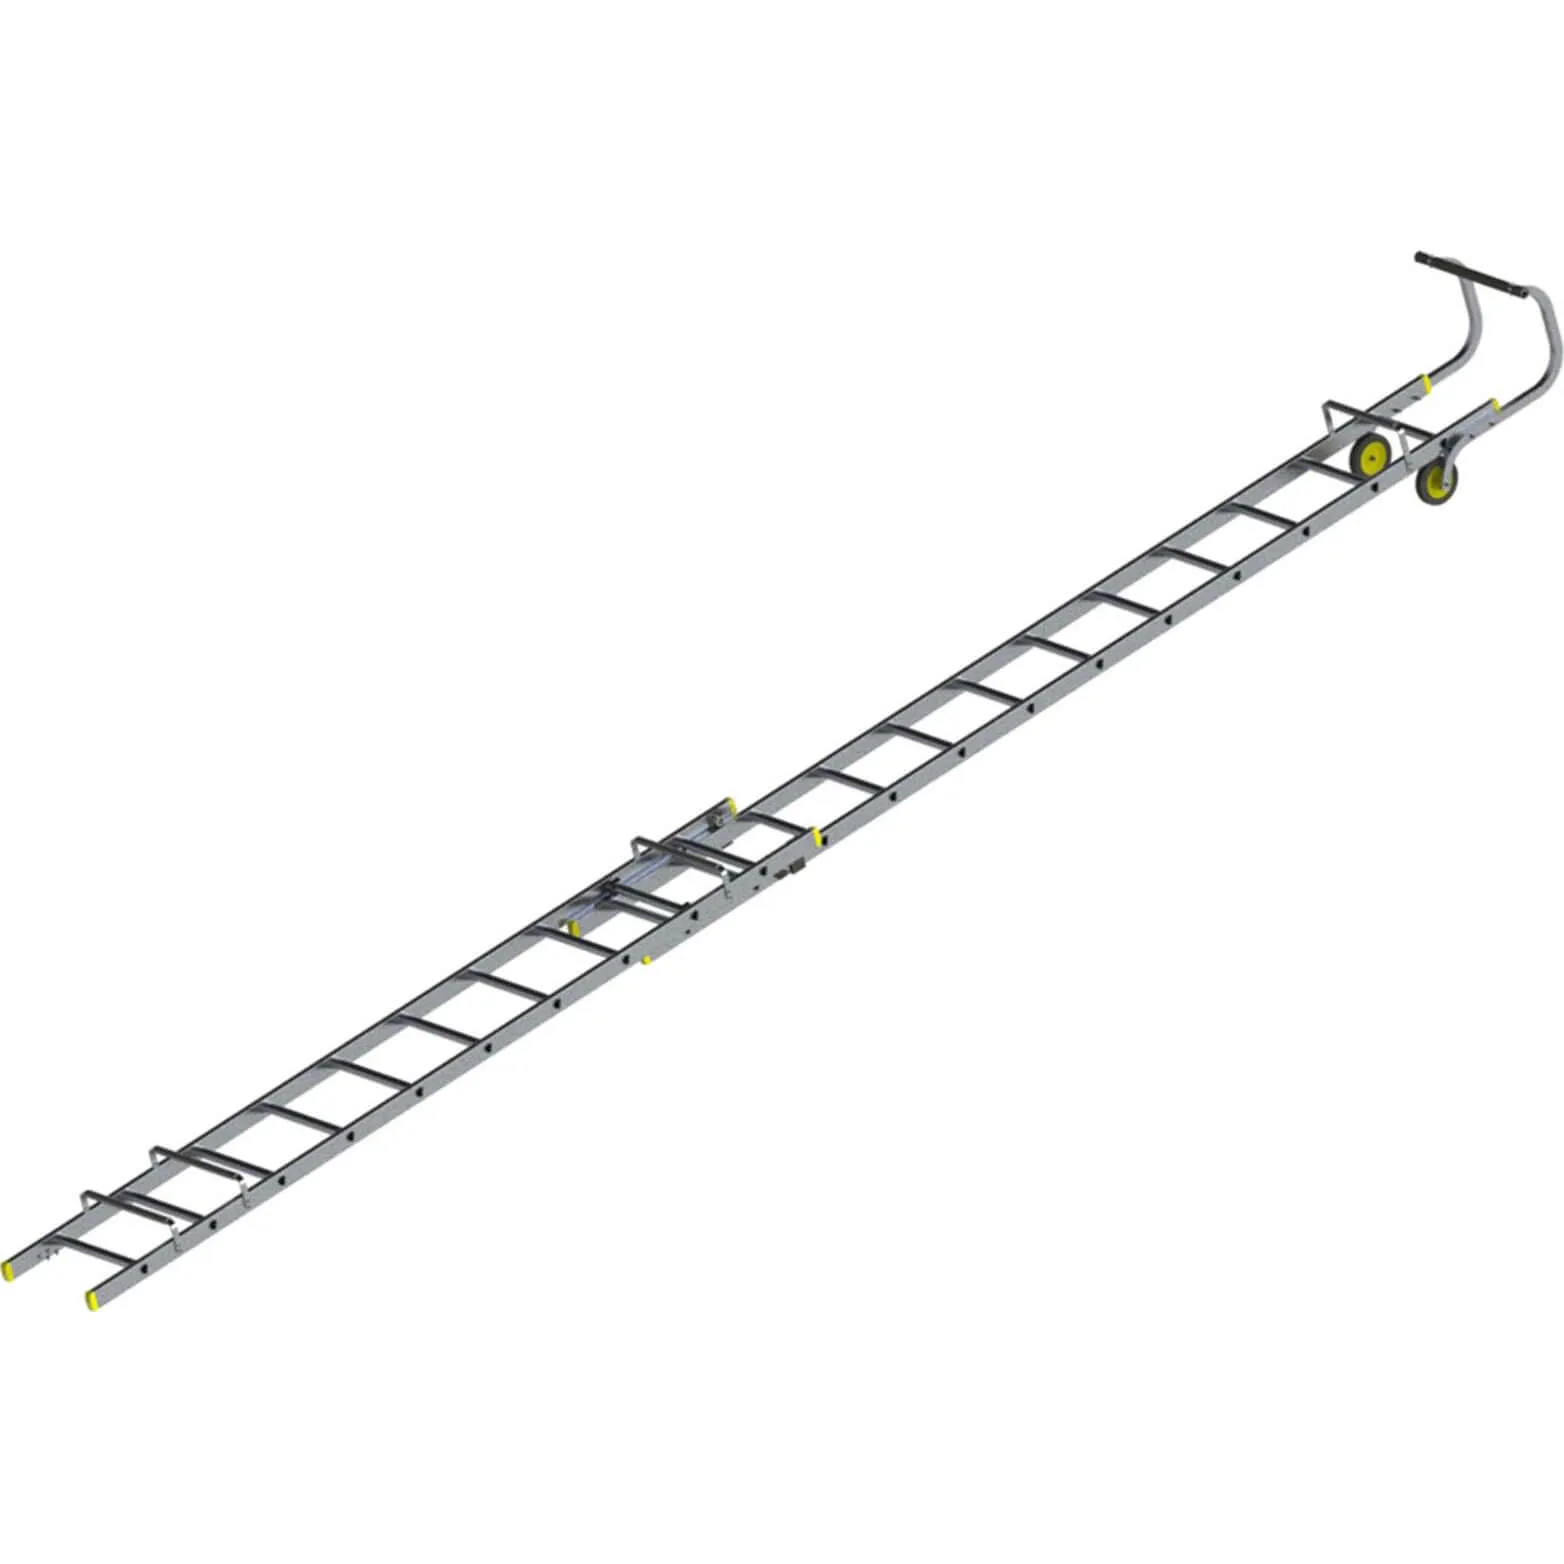 Youngman 2 Section Roof Ladder - 22